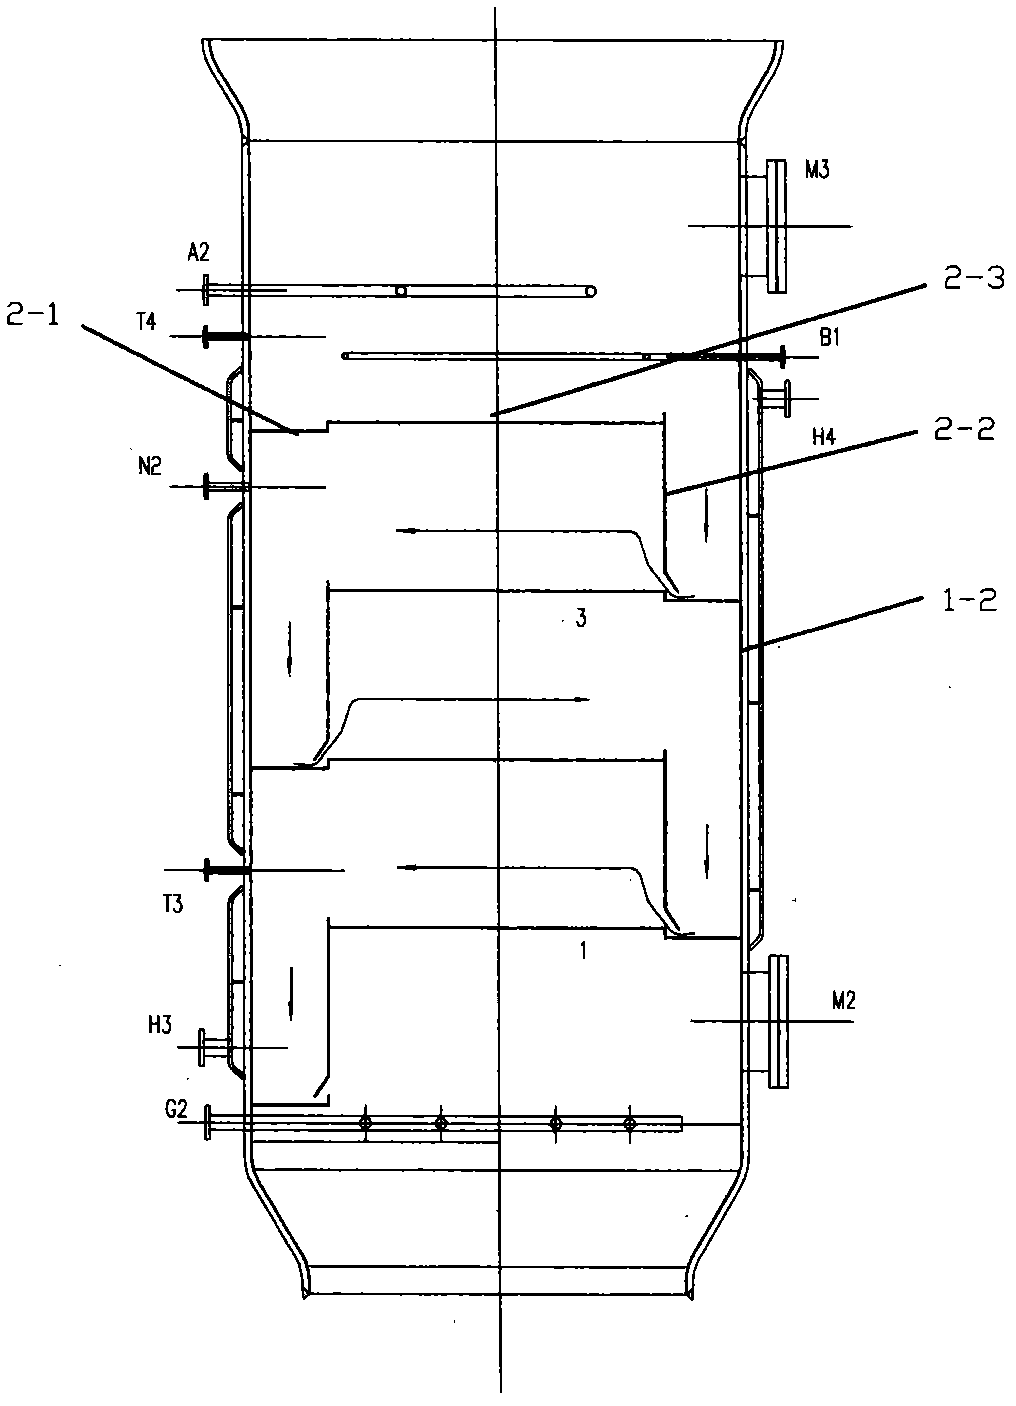 Continuous oxidation reaction kettle for trimethyl benzene